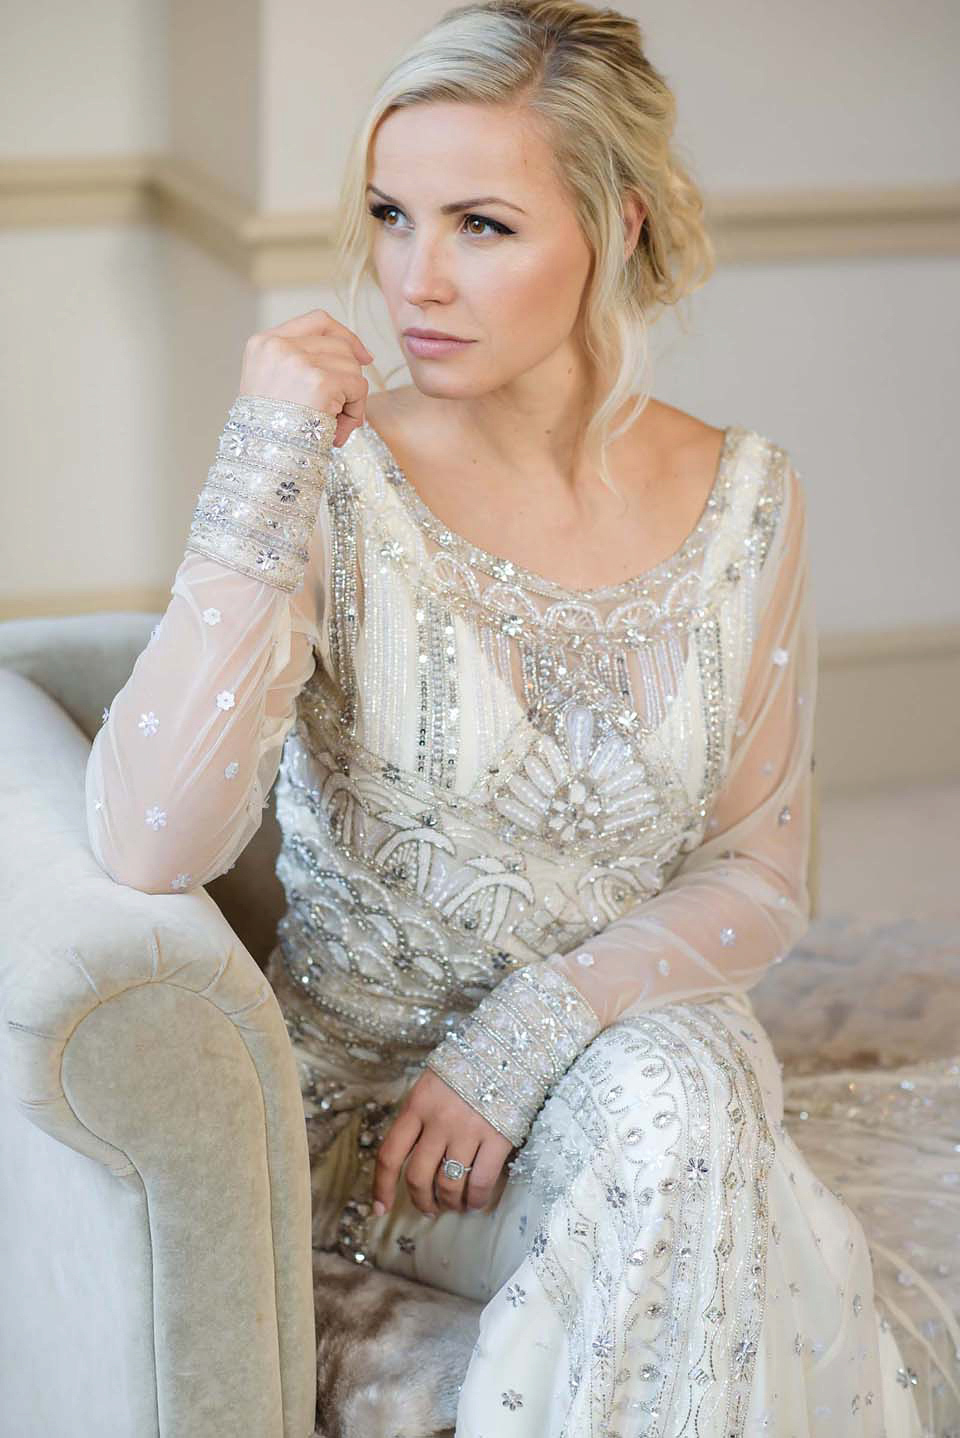 Vicky Rowe - The 2016 Nouveau collection of exquisitely beaded 1970's inspired bridal gowns.